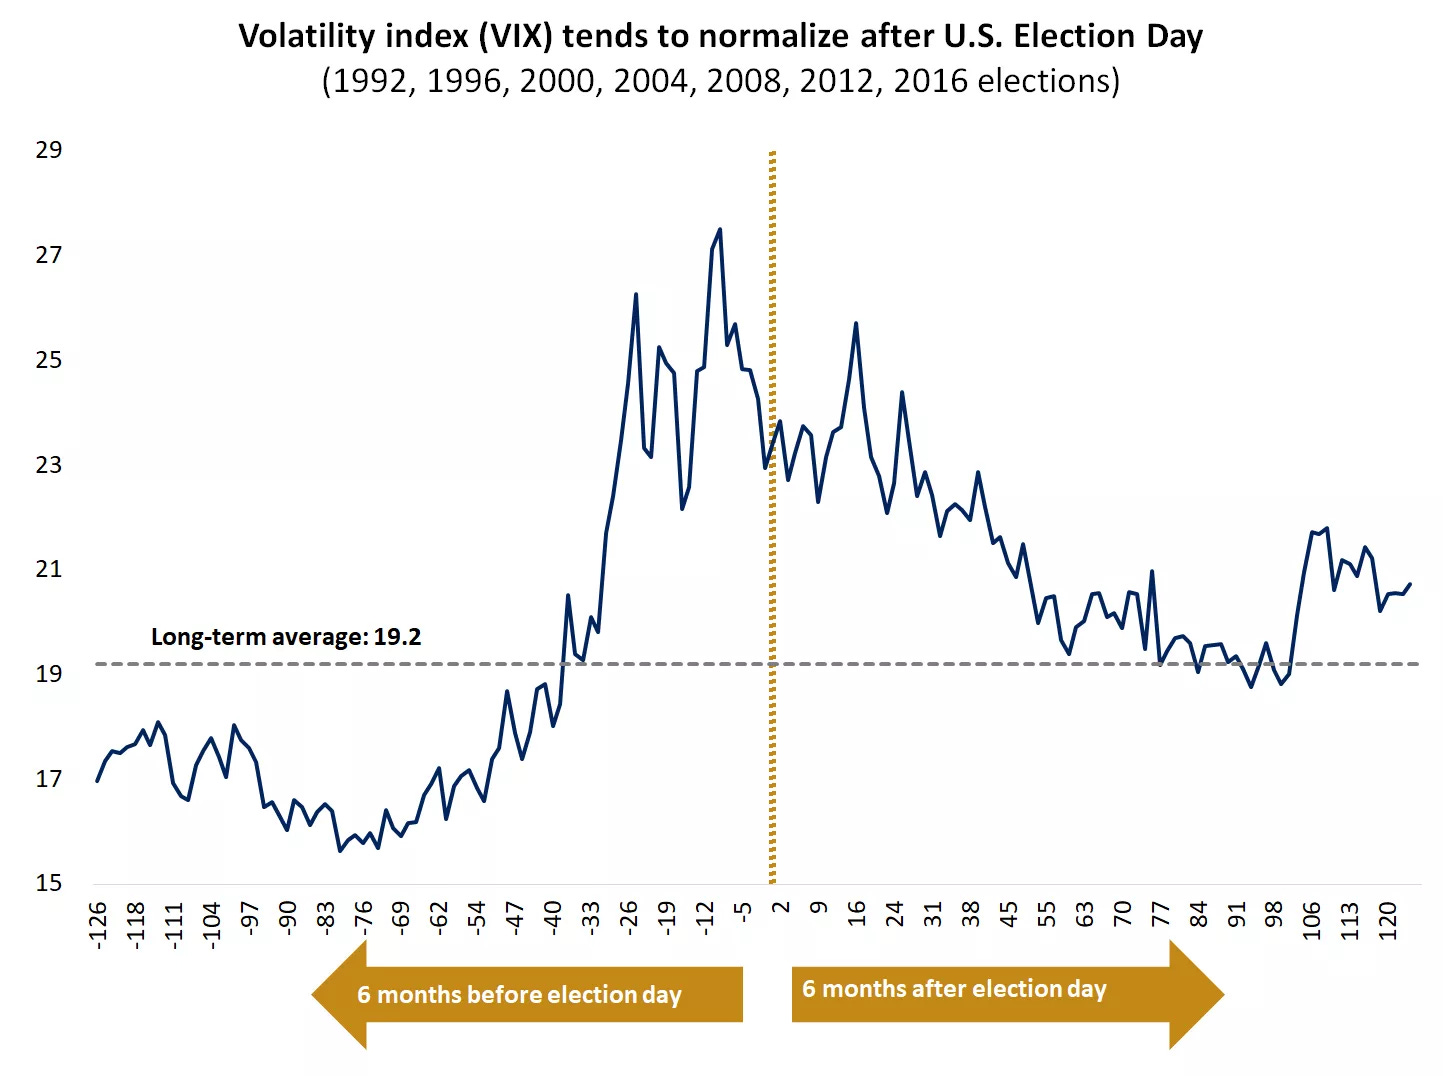  This chart shows the level of the VIX index 6 months before and after U.S. election day since 1992.